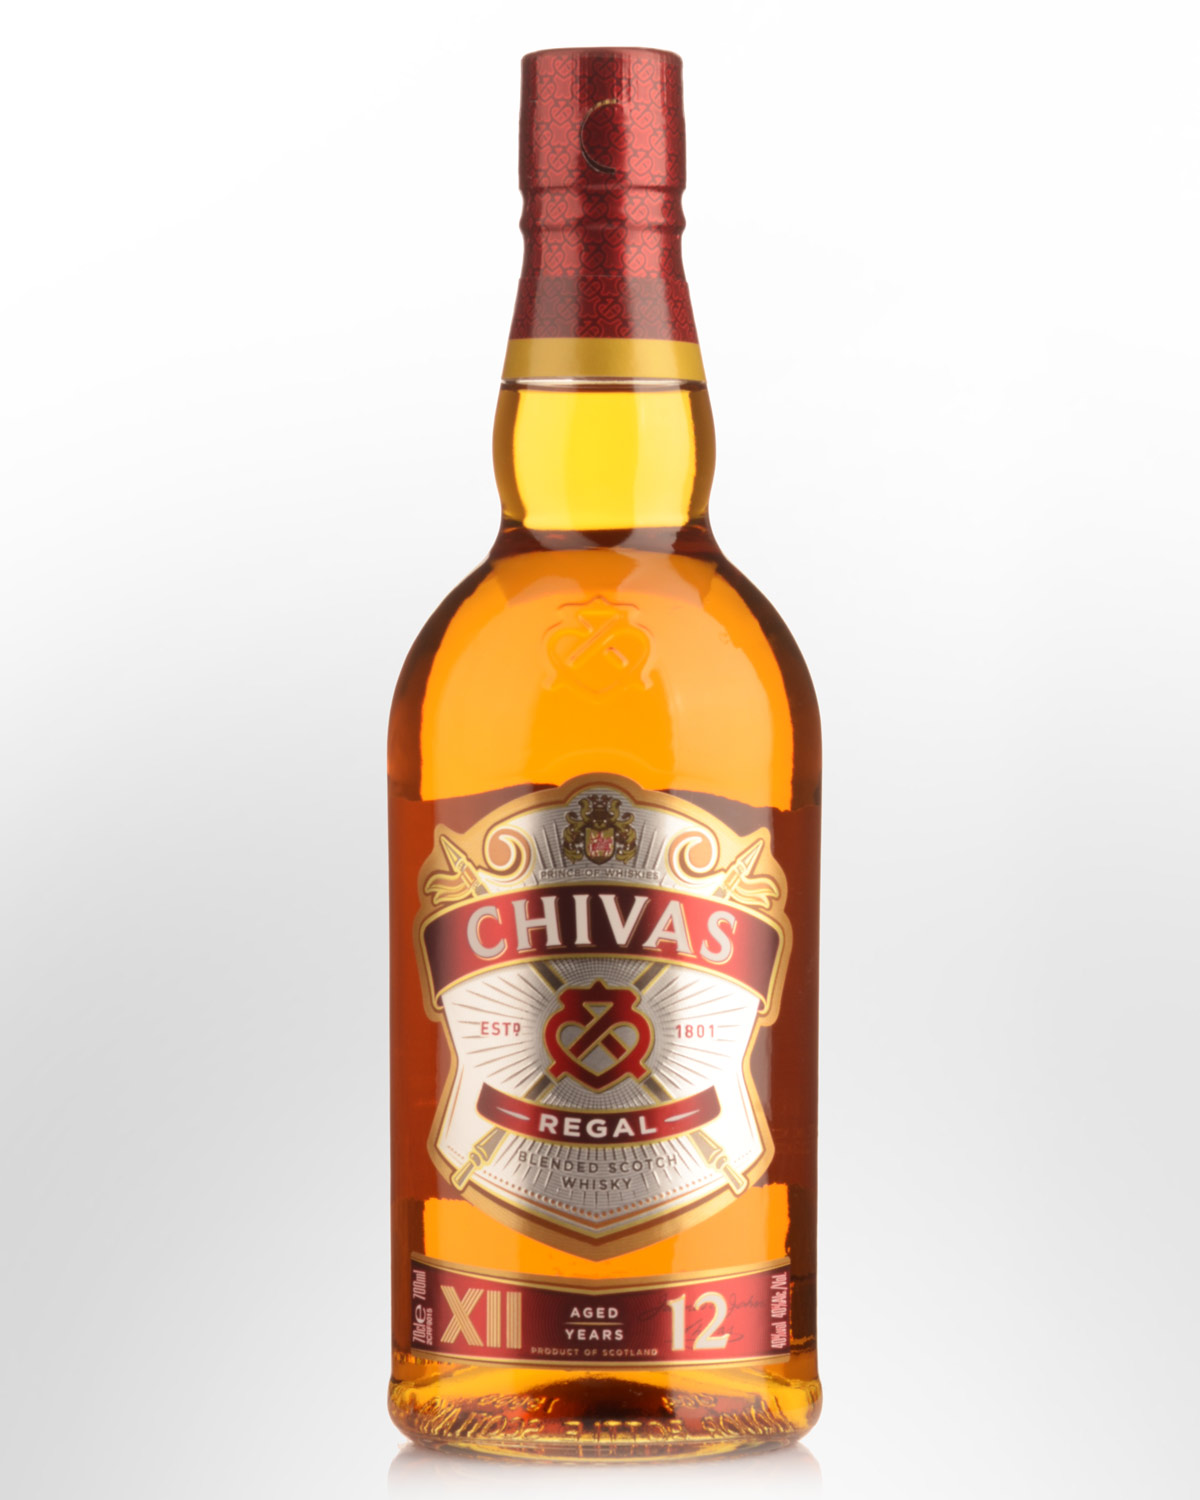 Whisky Review & Tasting Notes: Chivas Regal 12 year old 40%